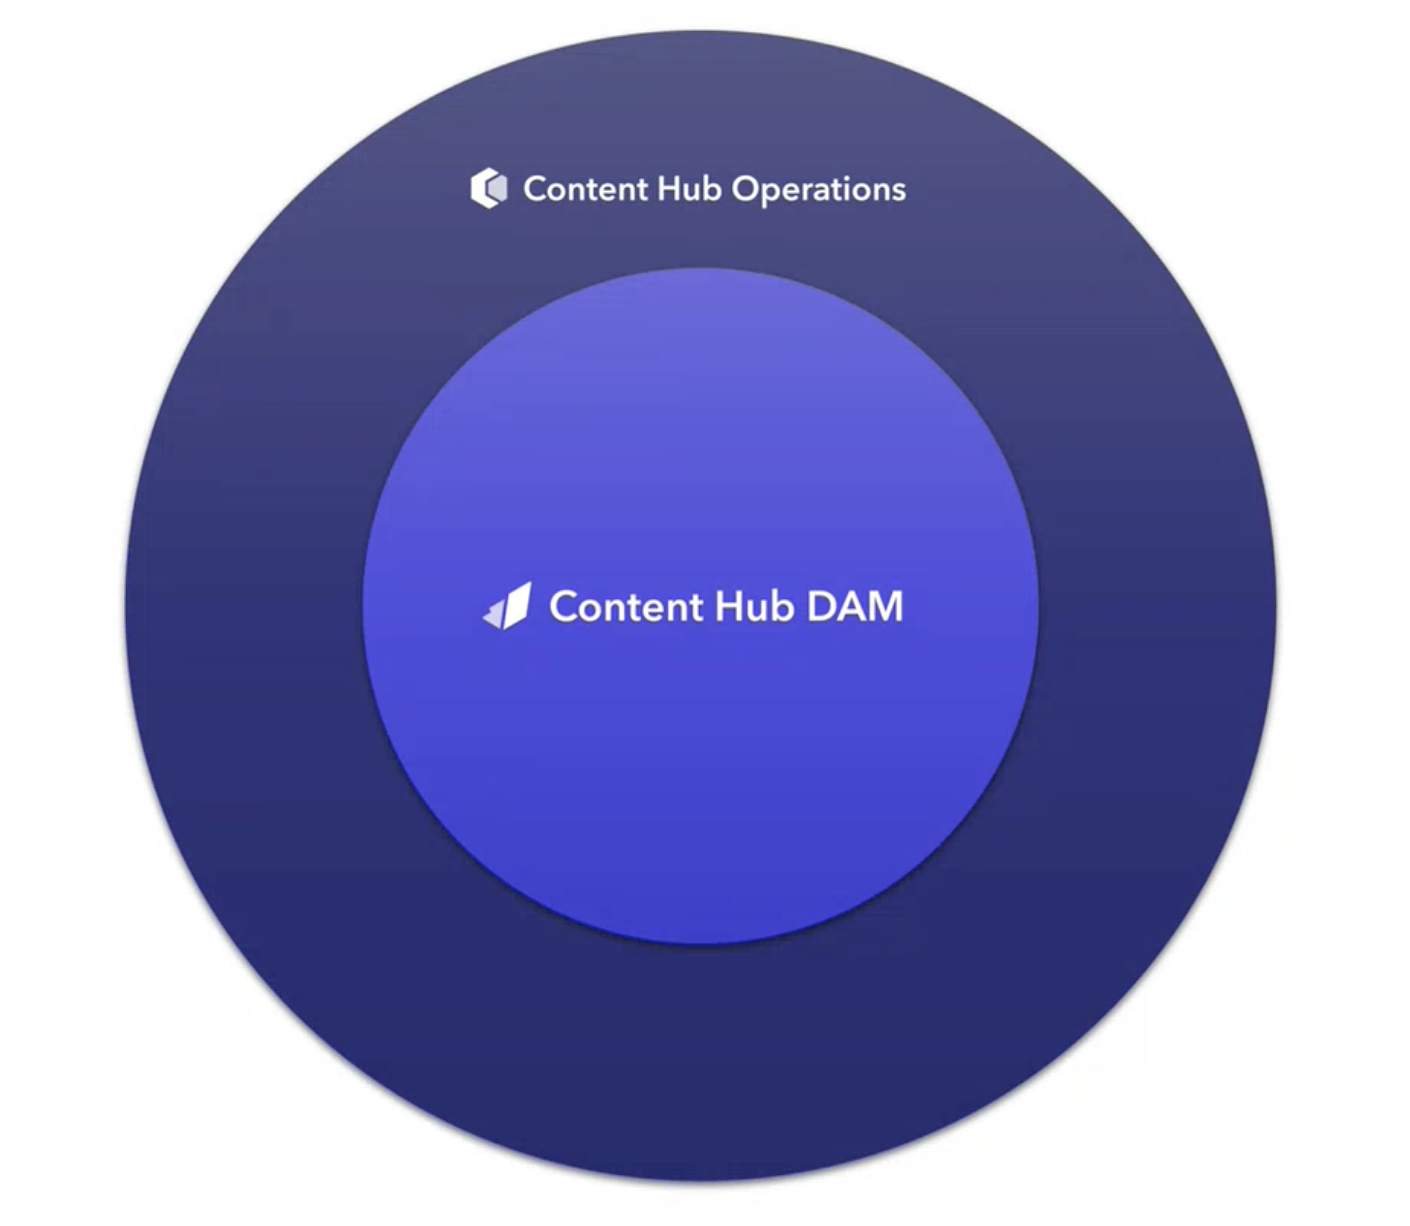 Sitecore Content Hub DAM is a subset of Sitecore Content Hub Operations.